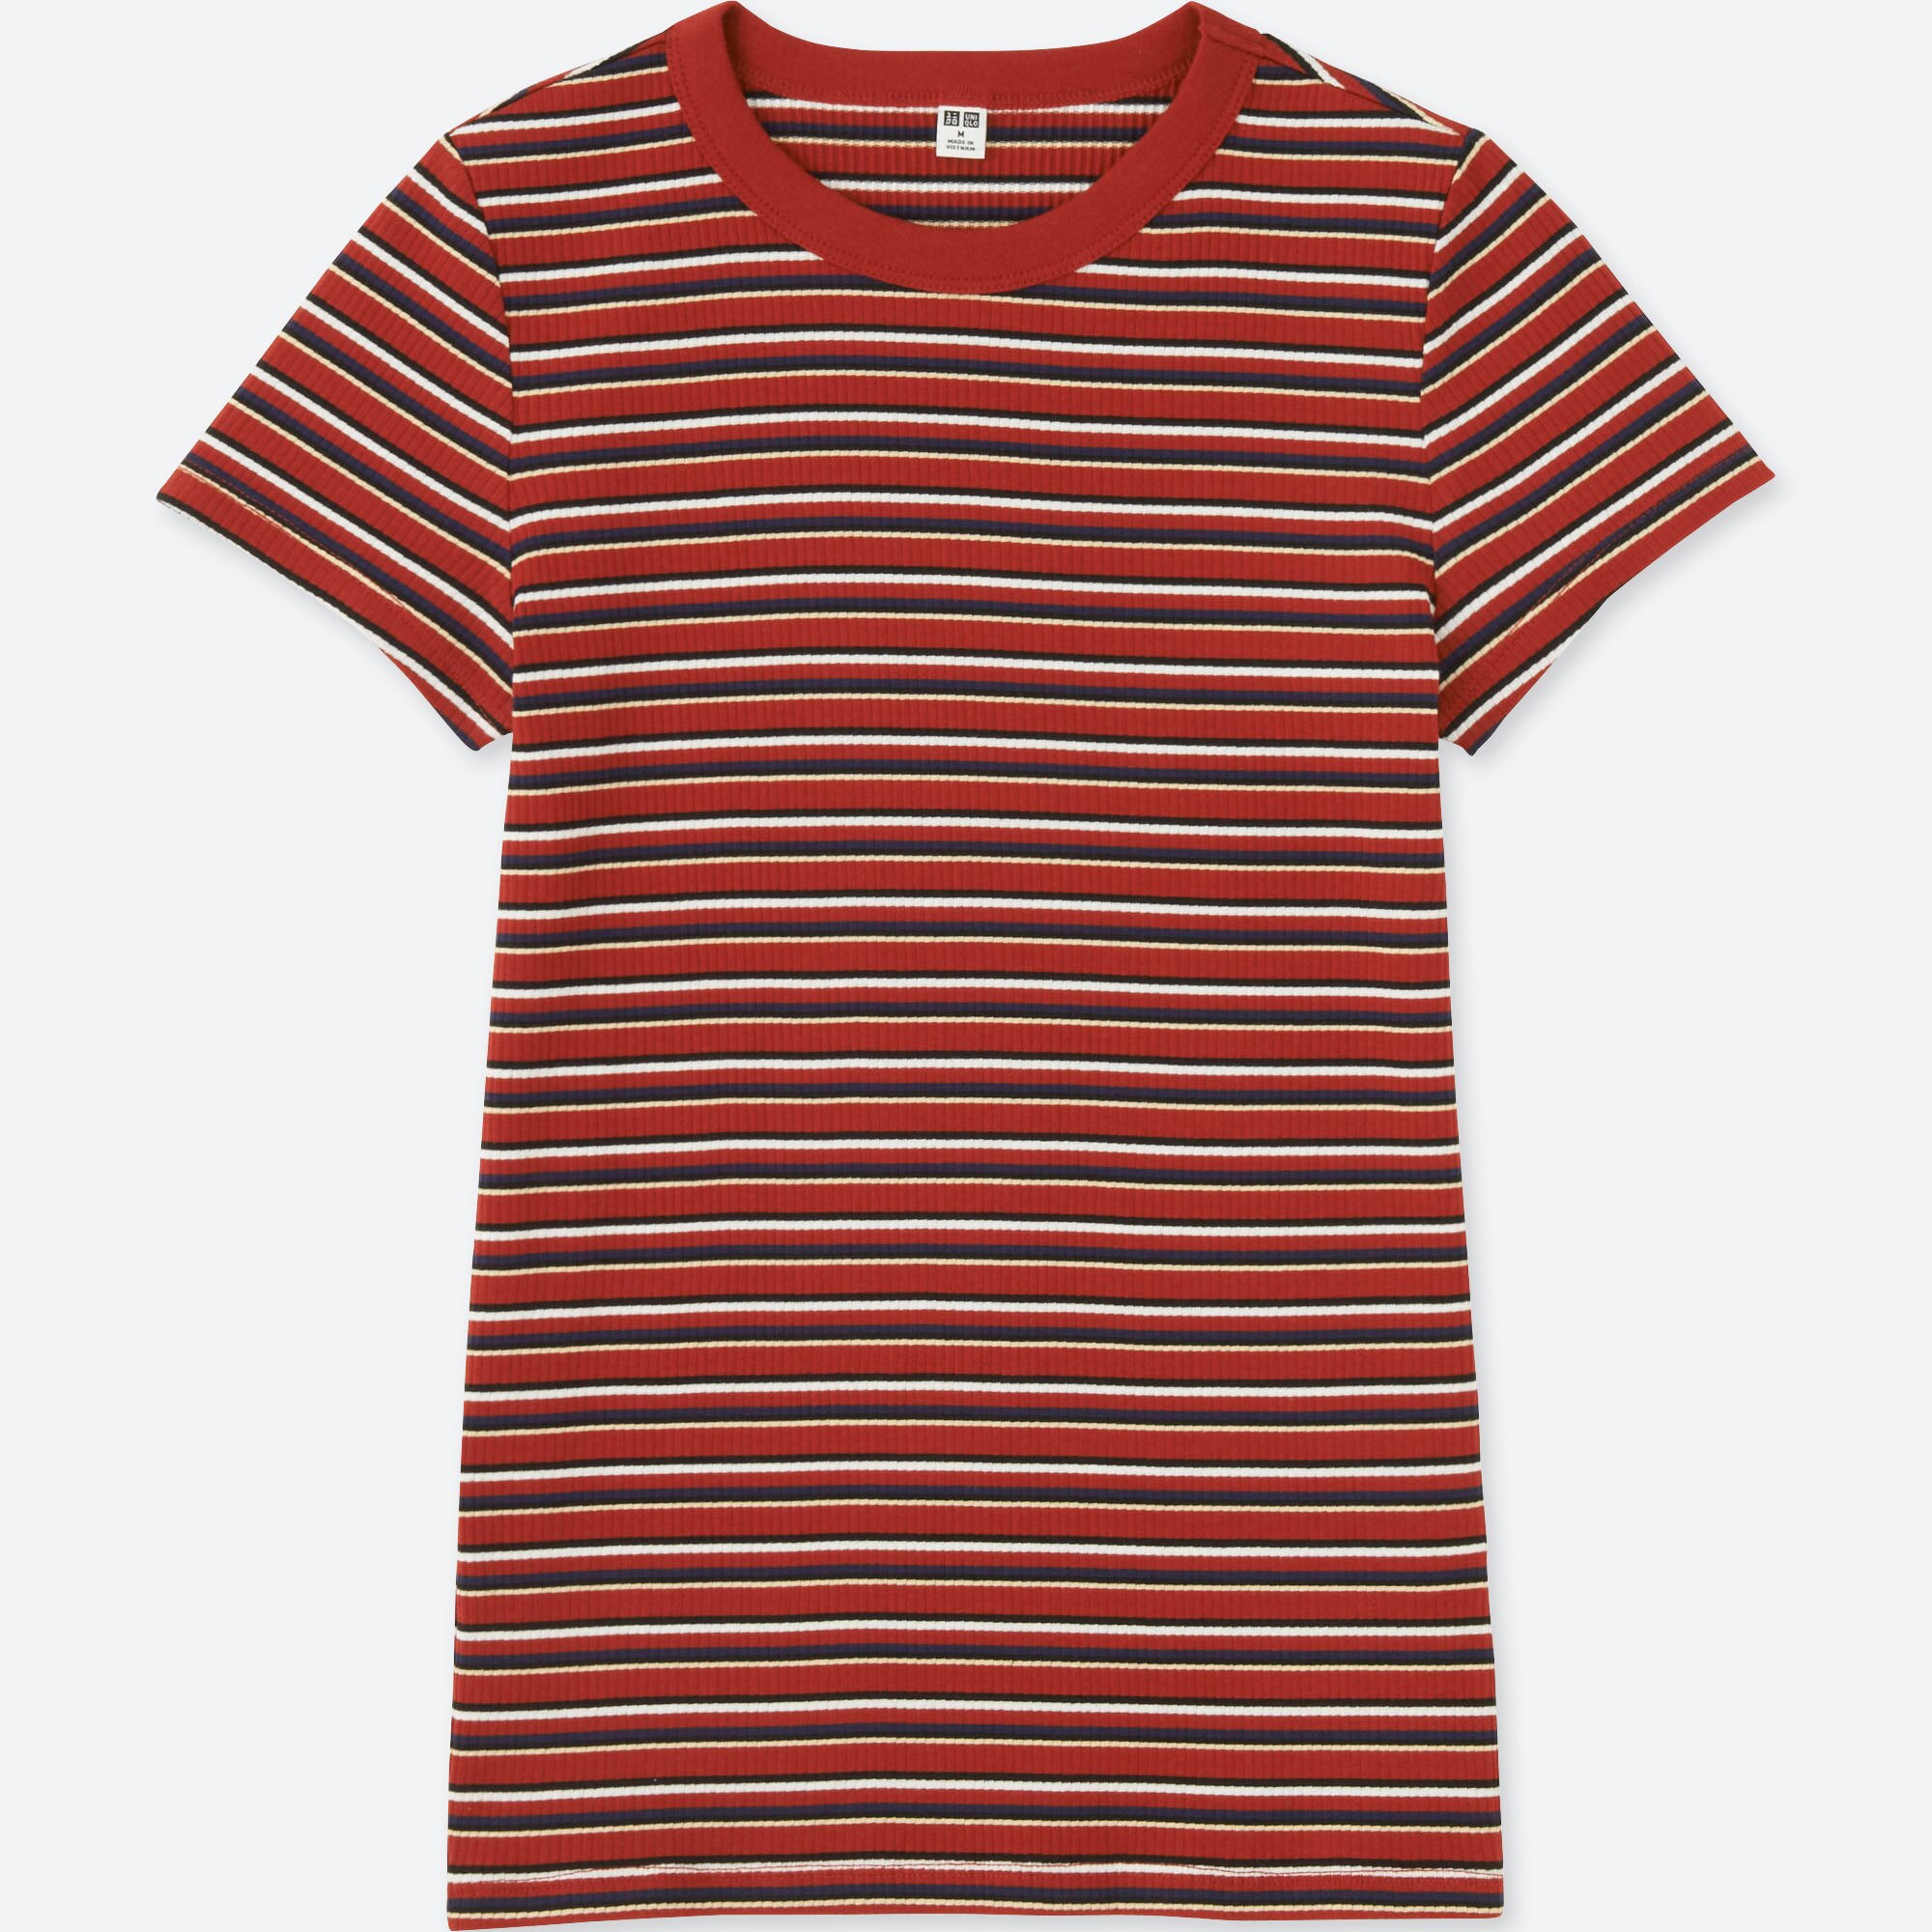 red and white womens striped shirt